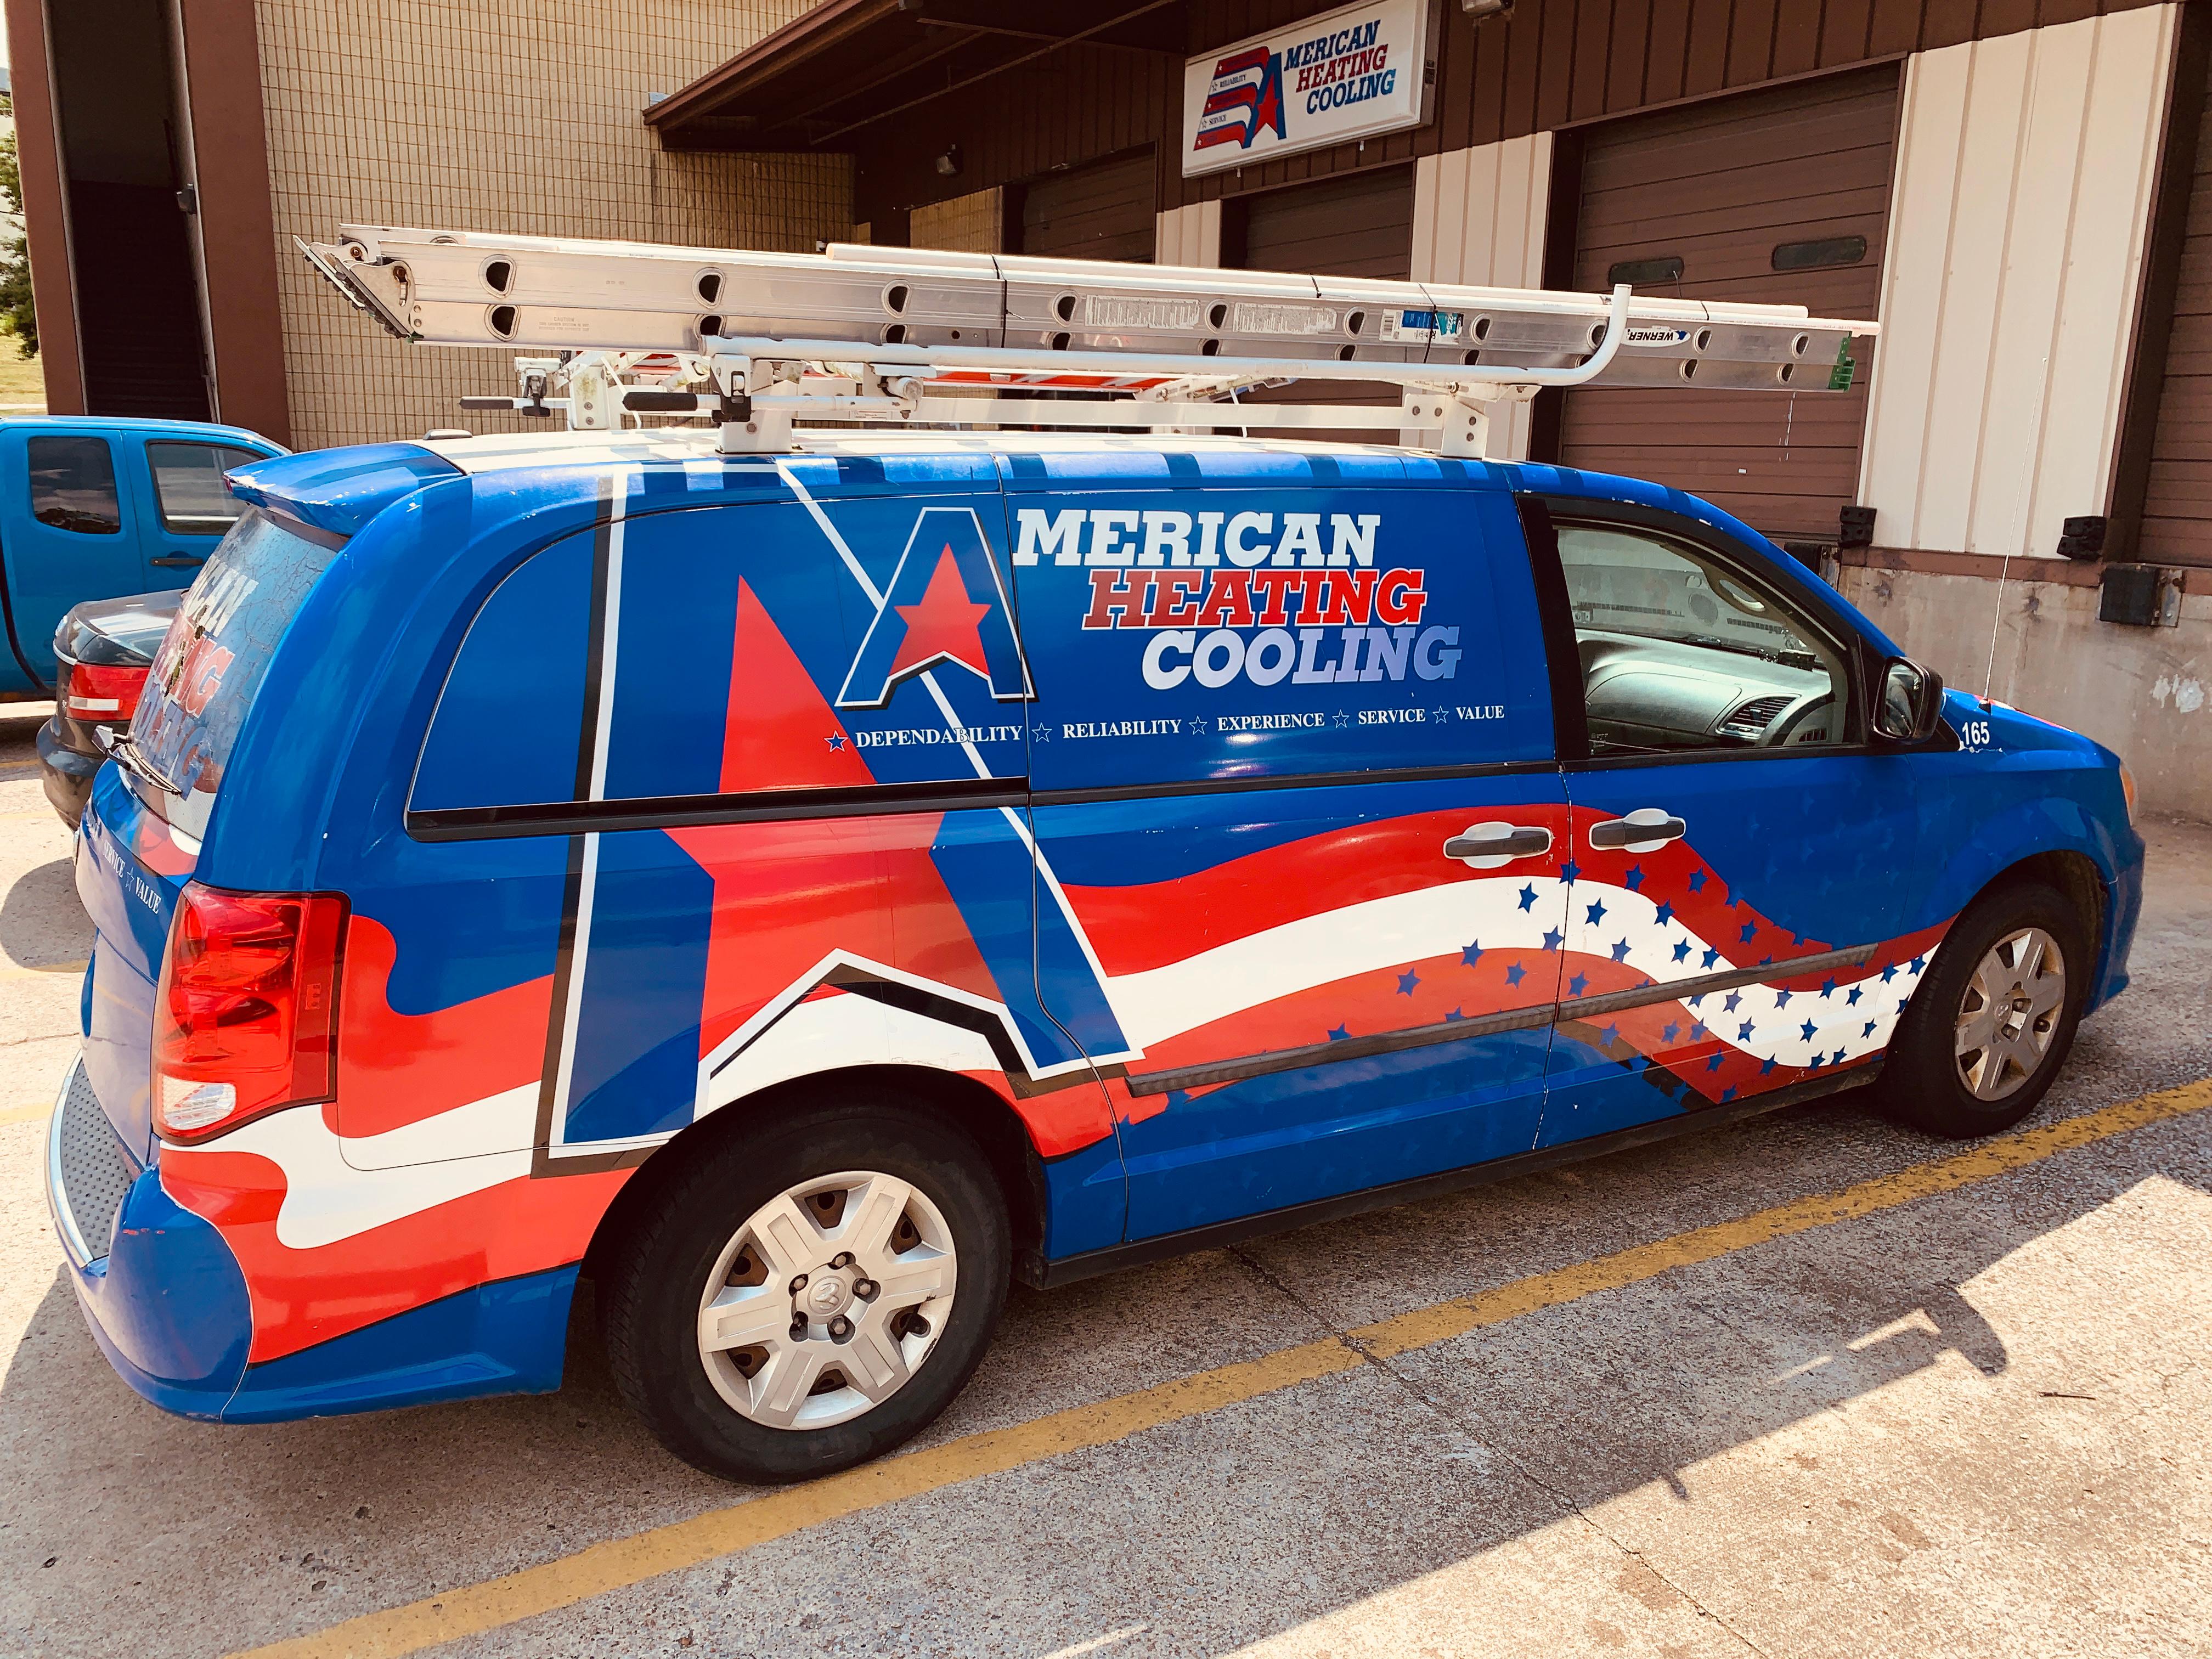 American Heating and Cooling, Inc. Photo